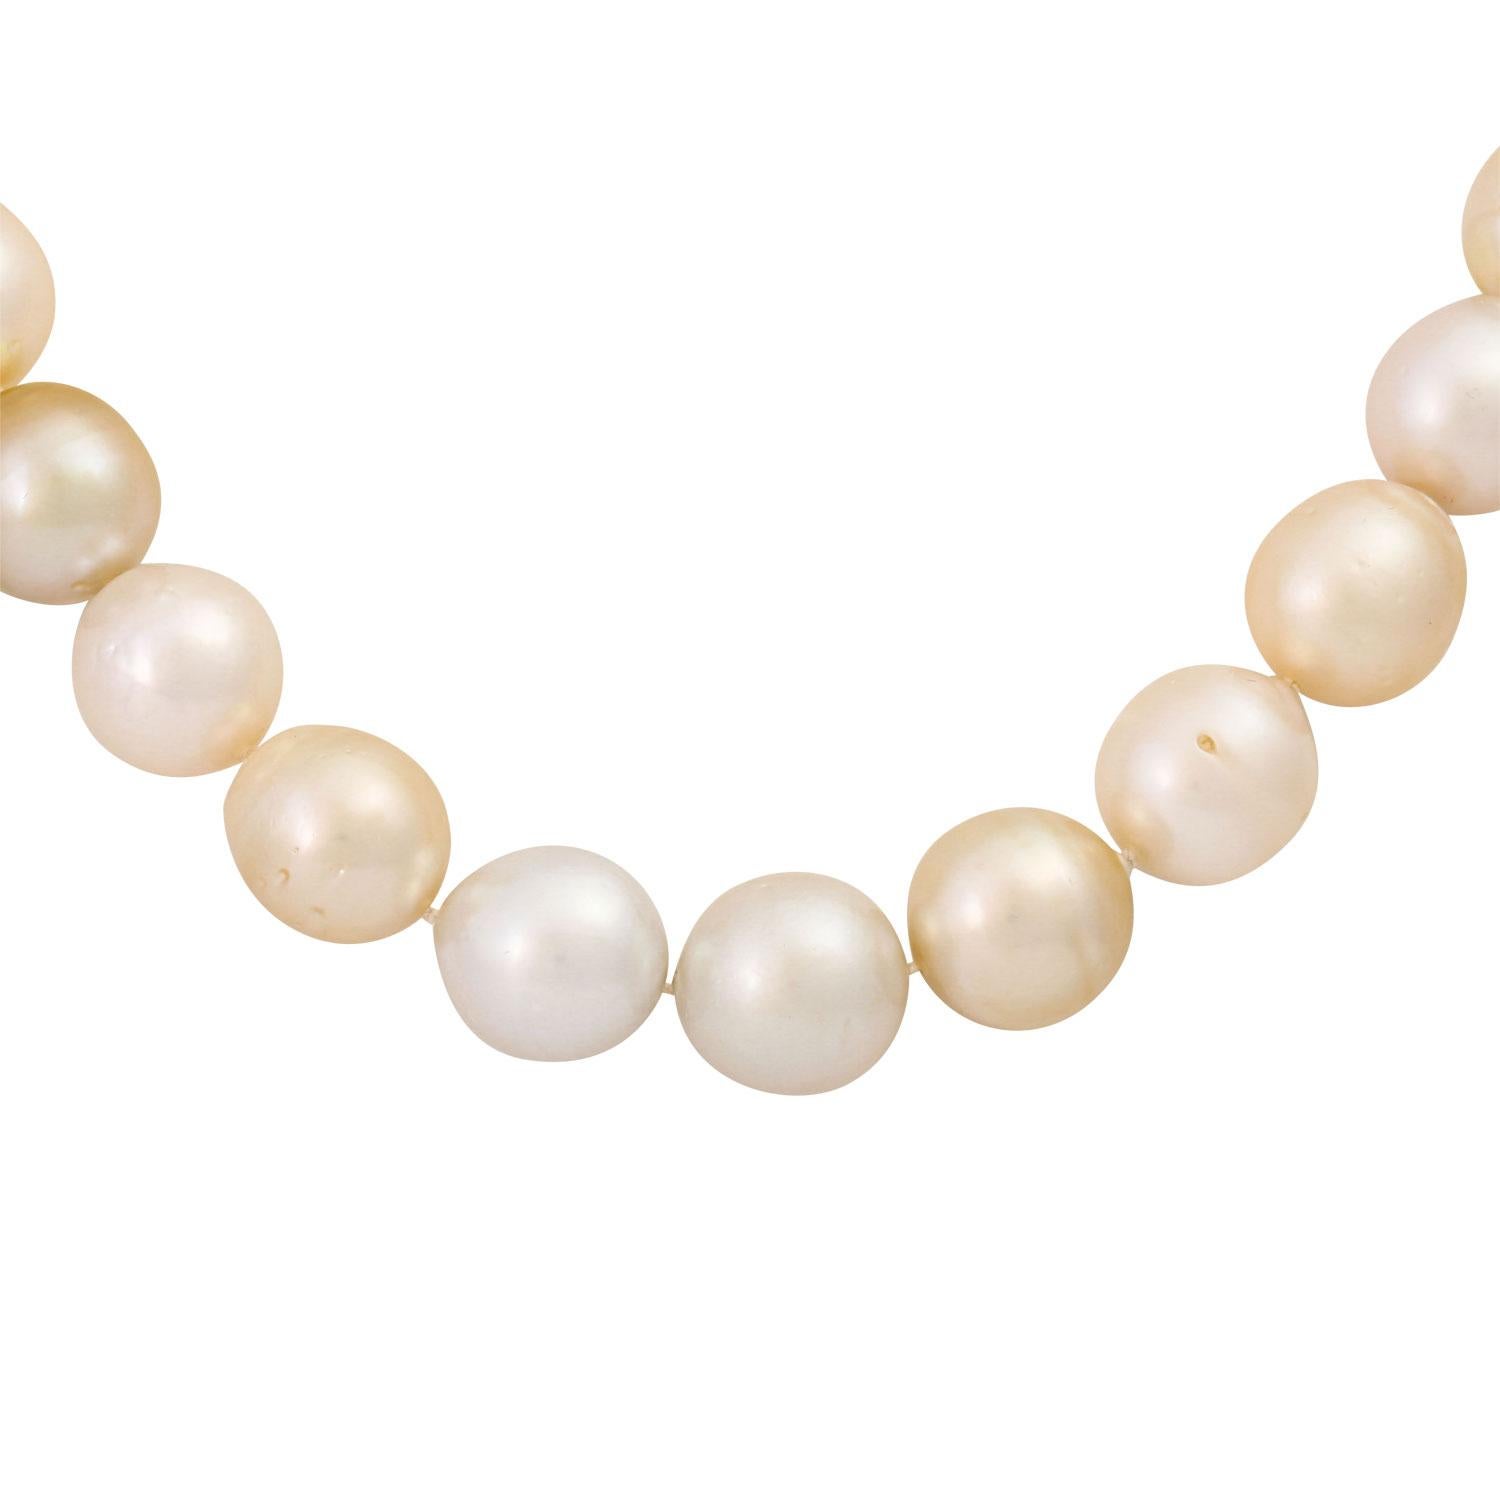 in baroque form with natural WMM, clasp GG 14K, L: approx. 45 cm, 21st century, good condition. (7)

 South Sea pearl necklace, 35 cultured pearls in baroque shape with natural growth marks, clasp YG 14K, L: approx. 45 cm, 21st century, good